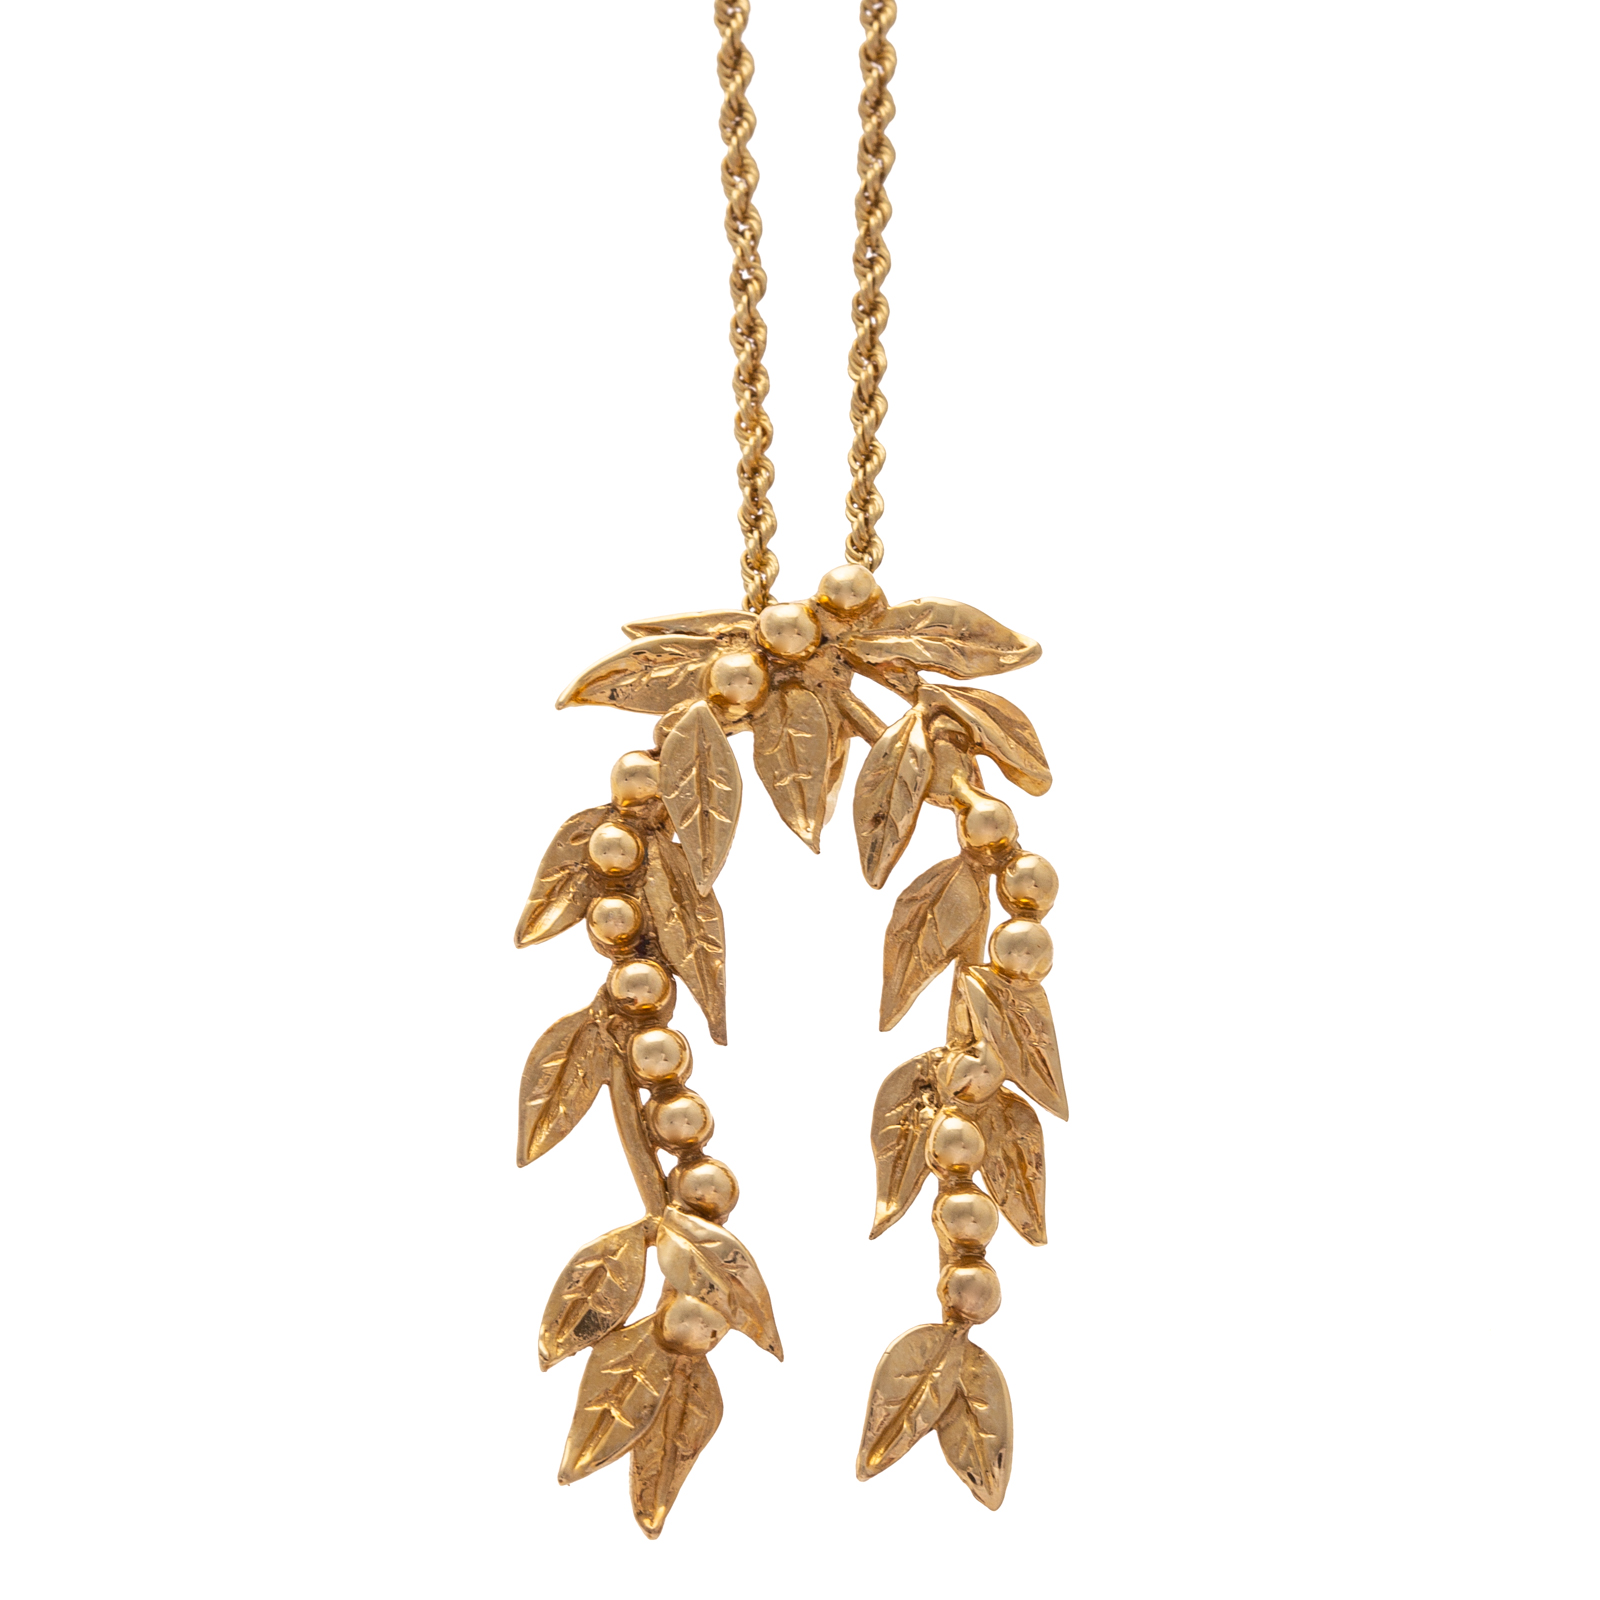 A 14K LEAF & BERRY PENDANT ON CHAIN